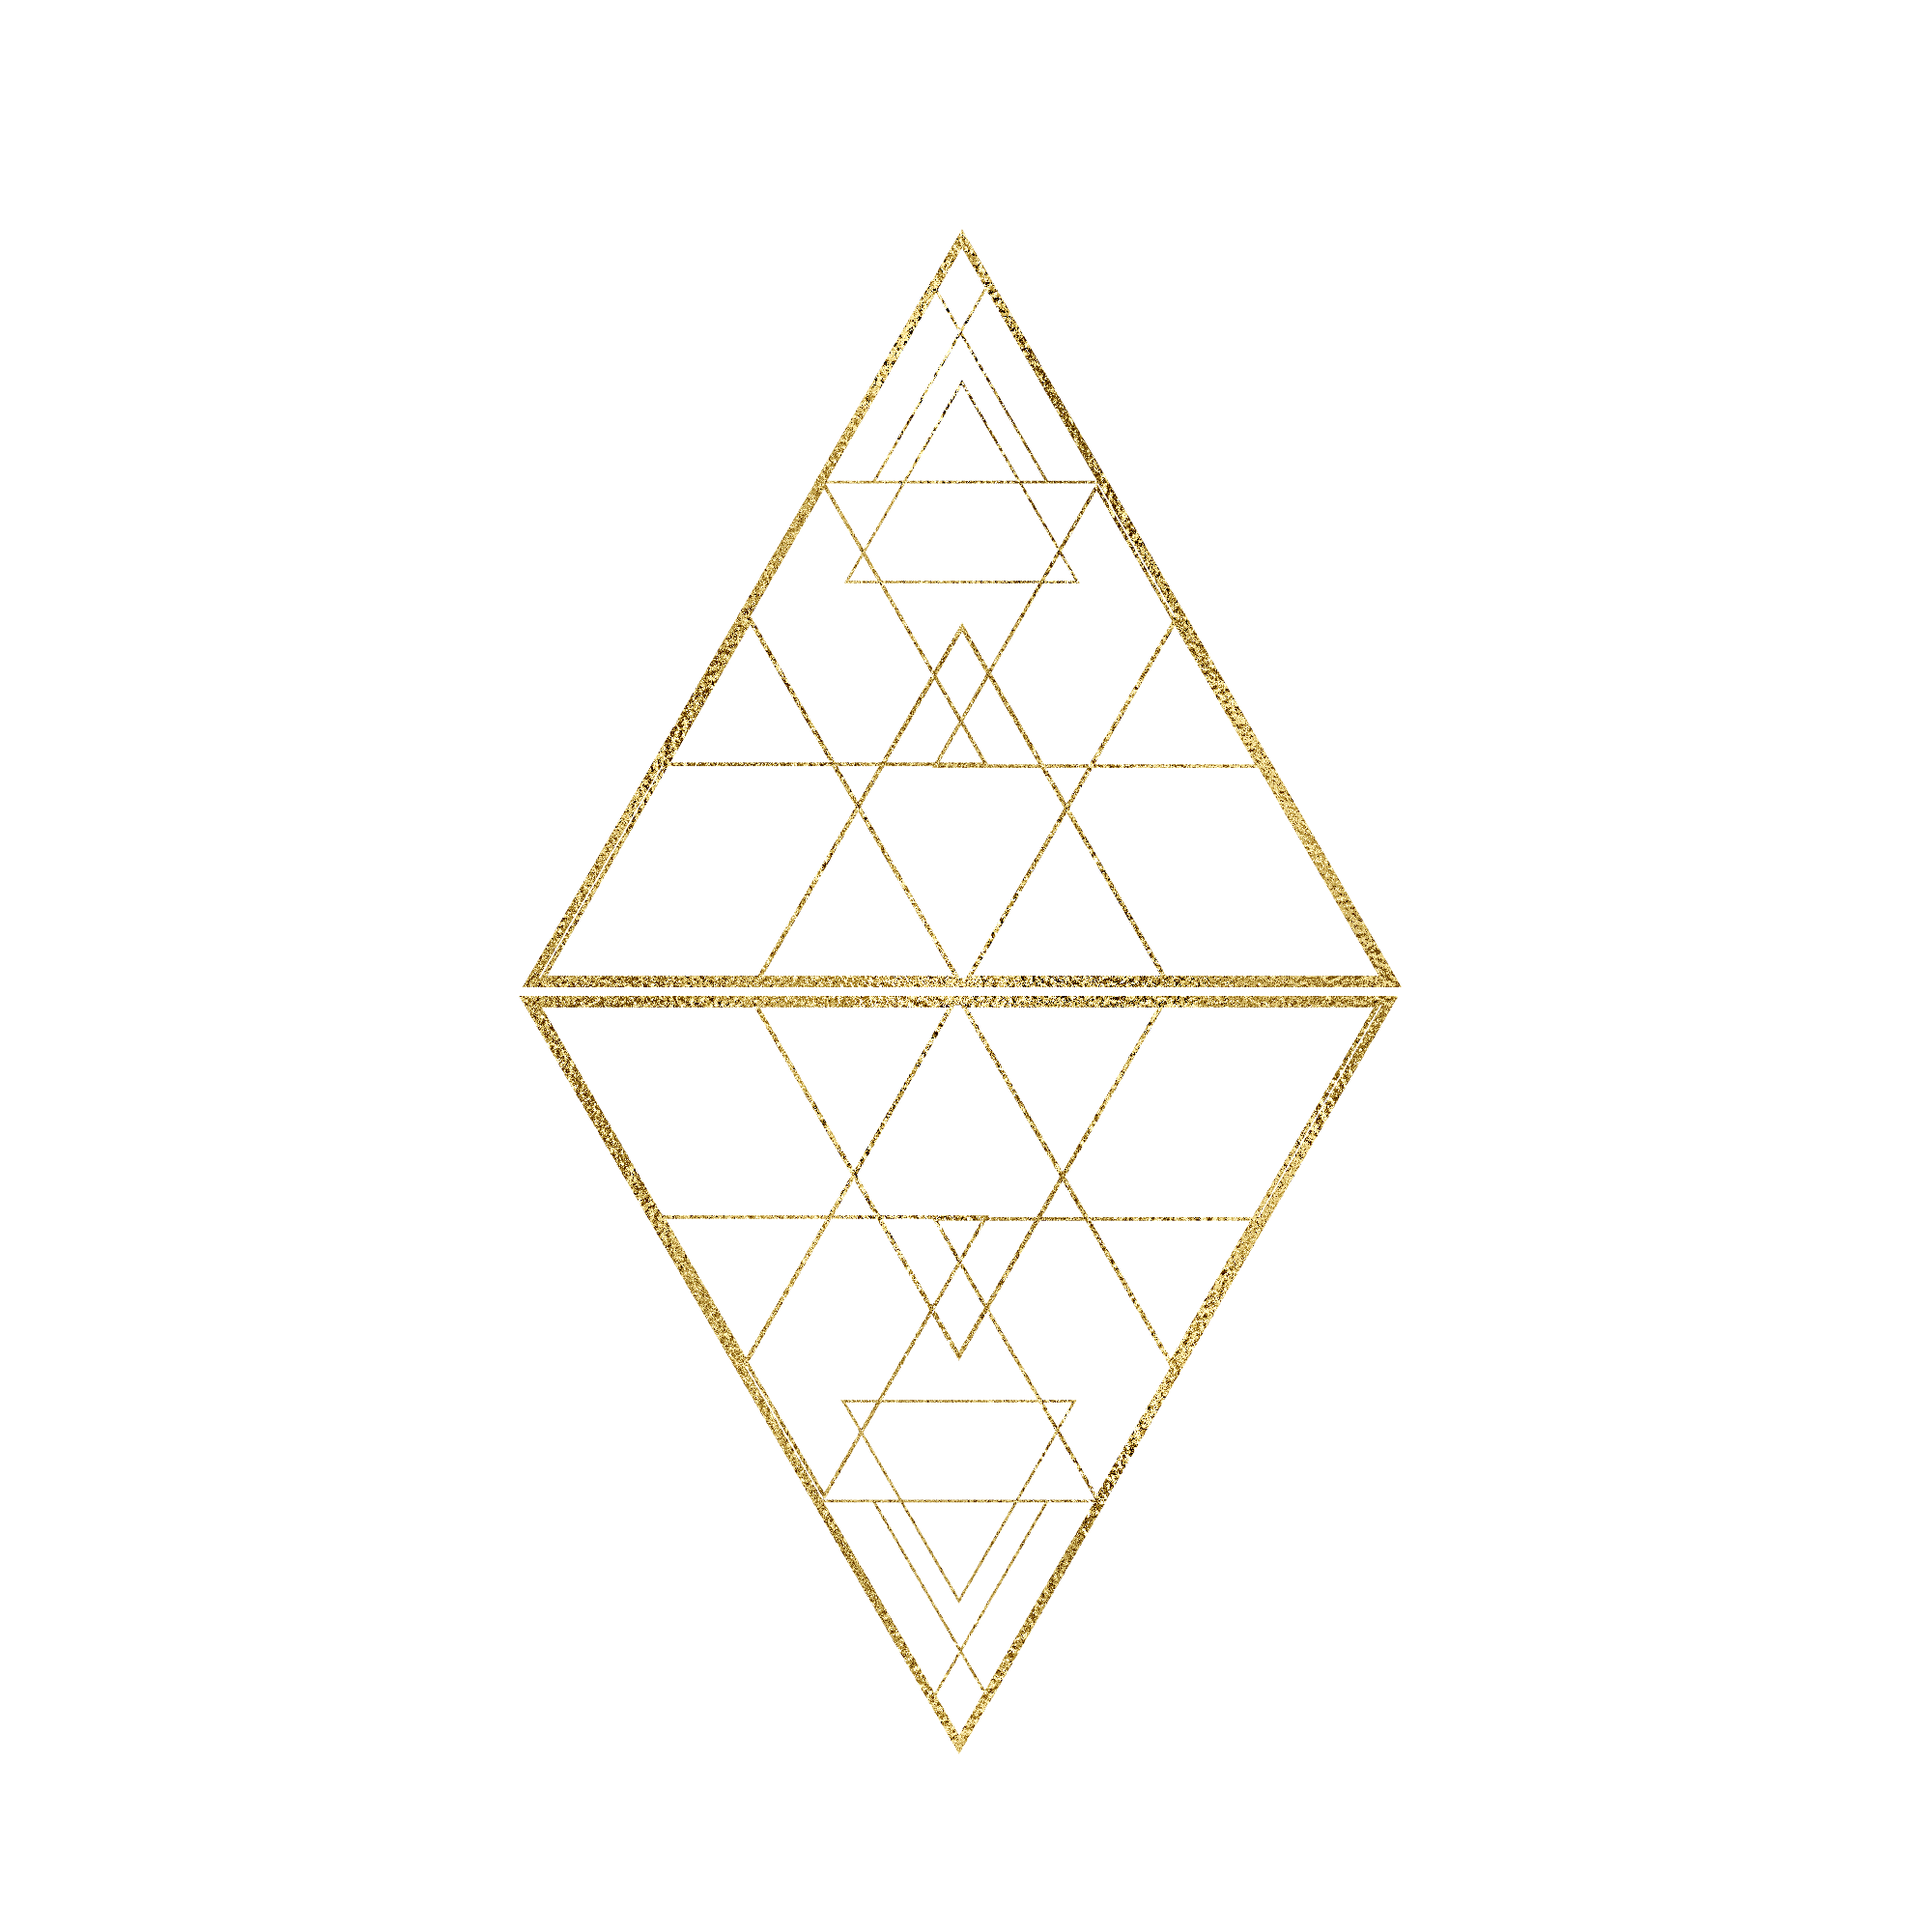 Pattern Diamond Triangle Golden HD Image Free PNG Clipart